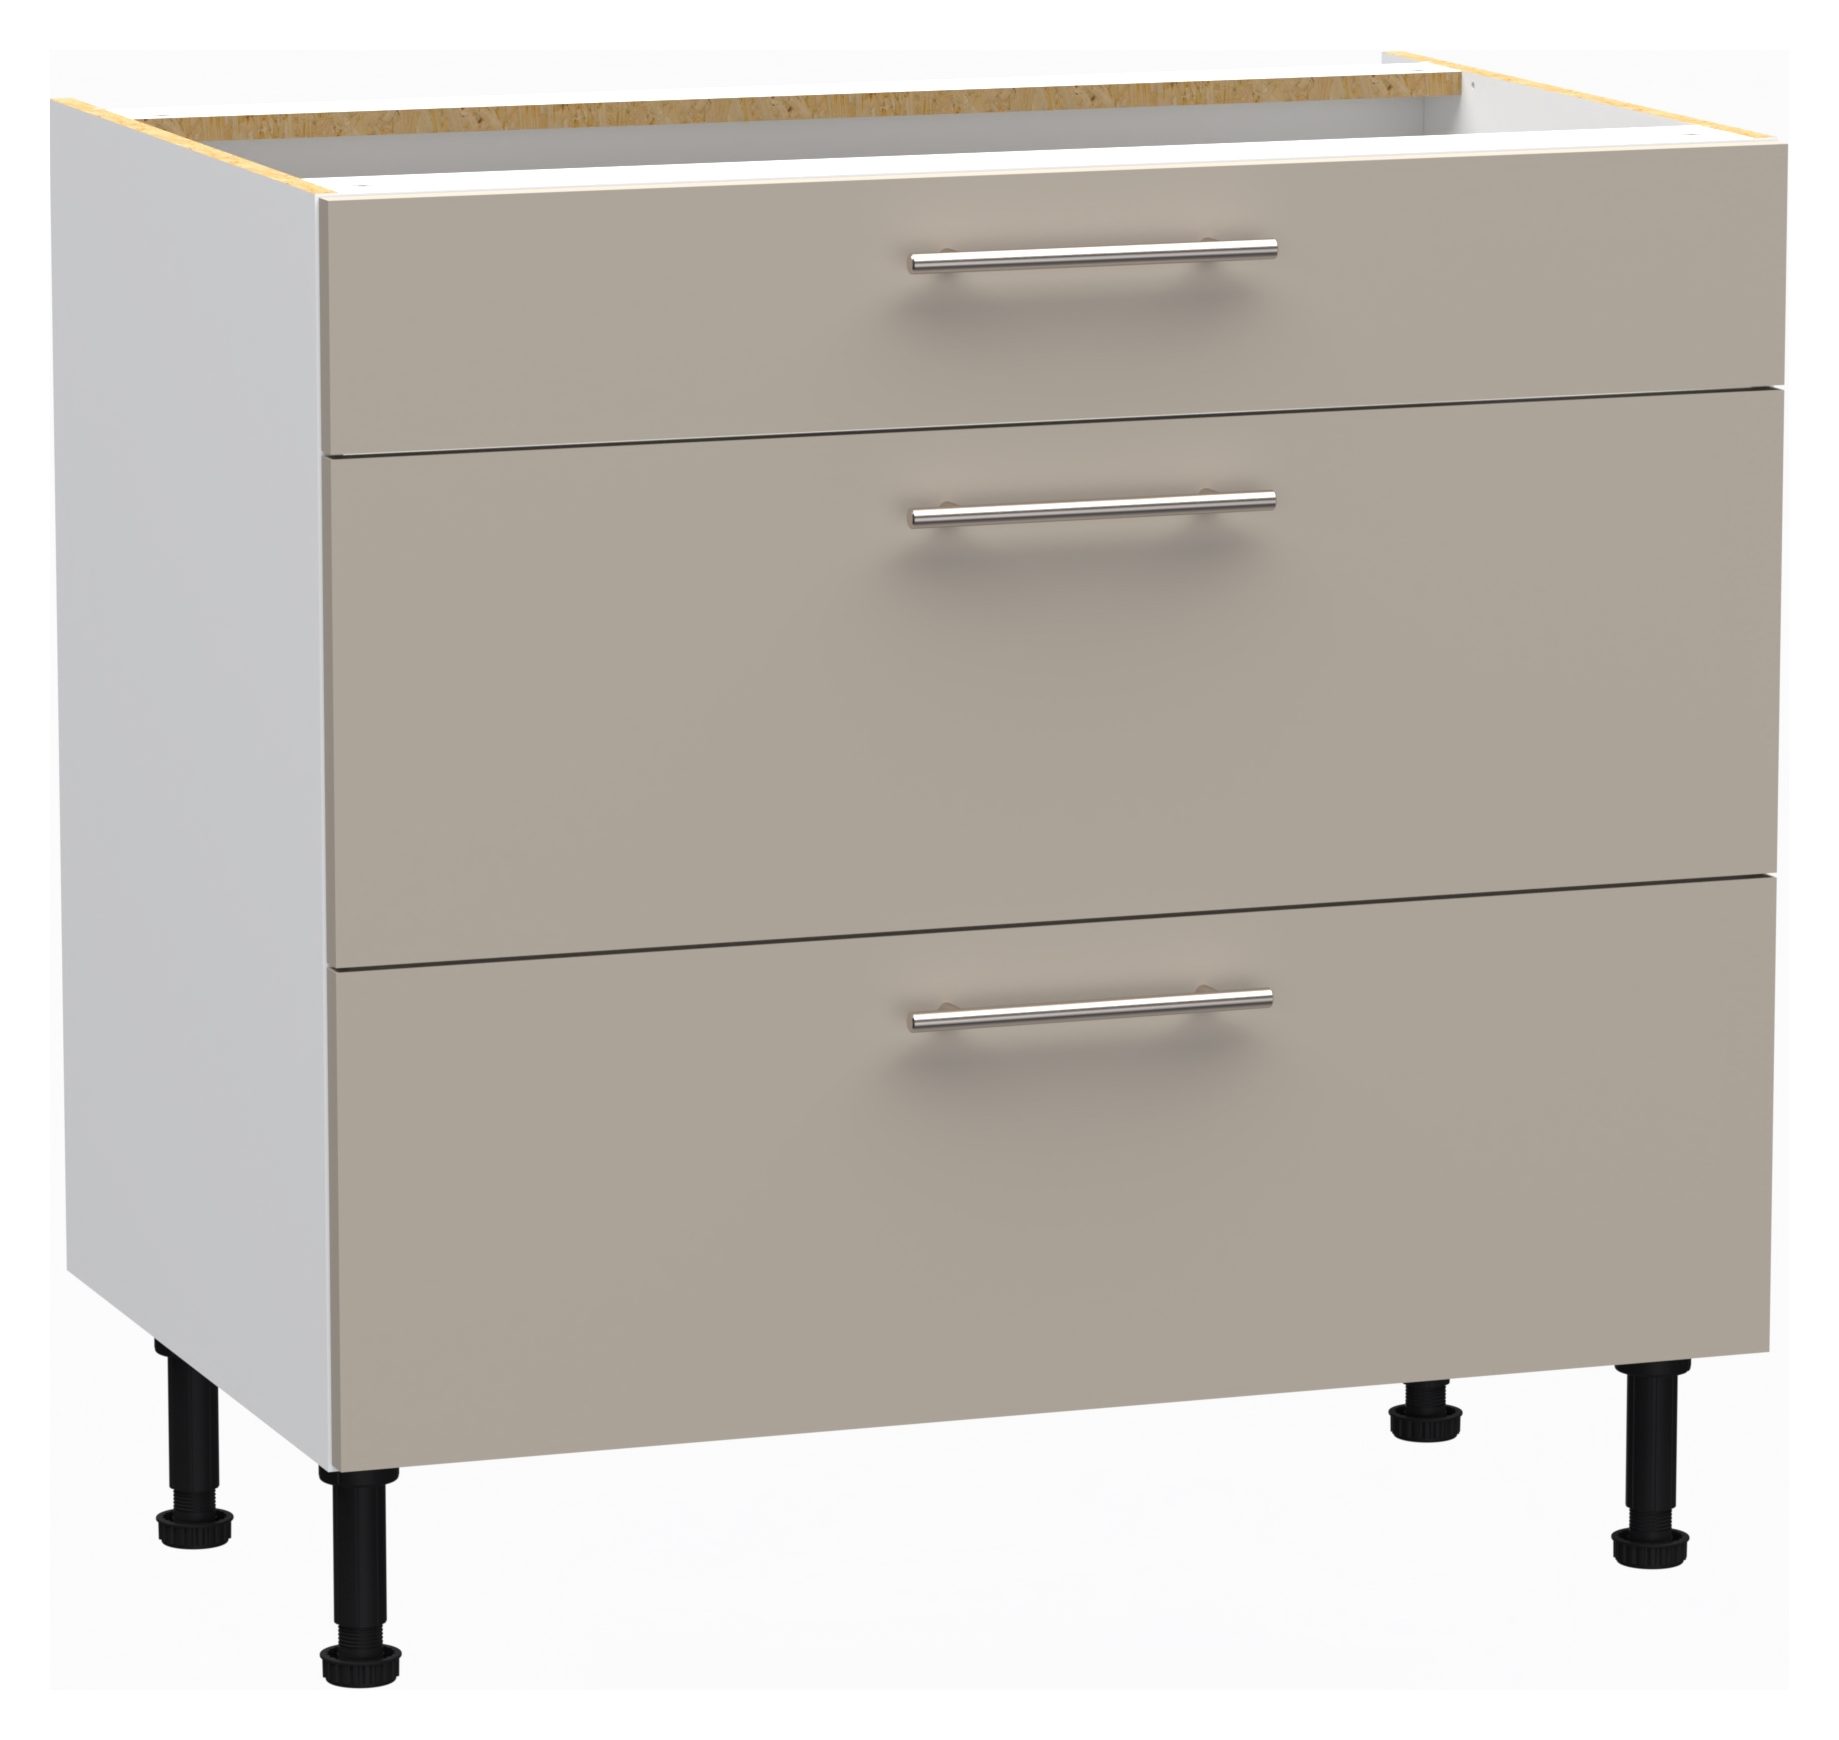 Image of Wickes Orlando Stone Drawer Unit - 900mm (Part 1 of 2)